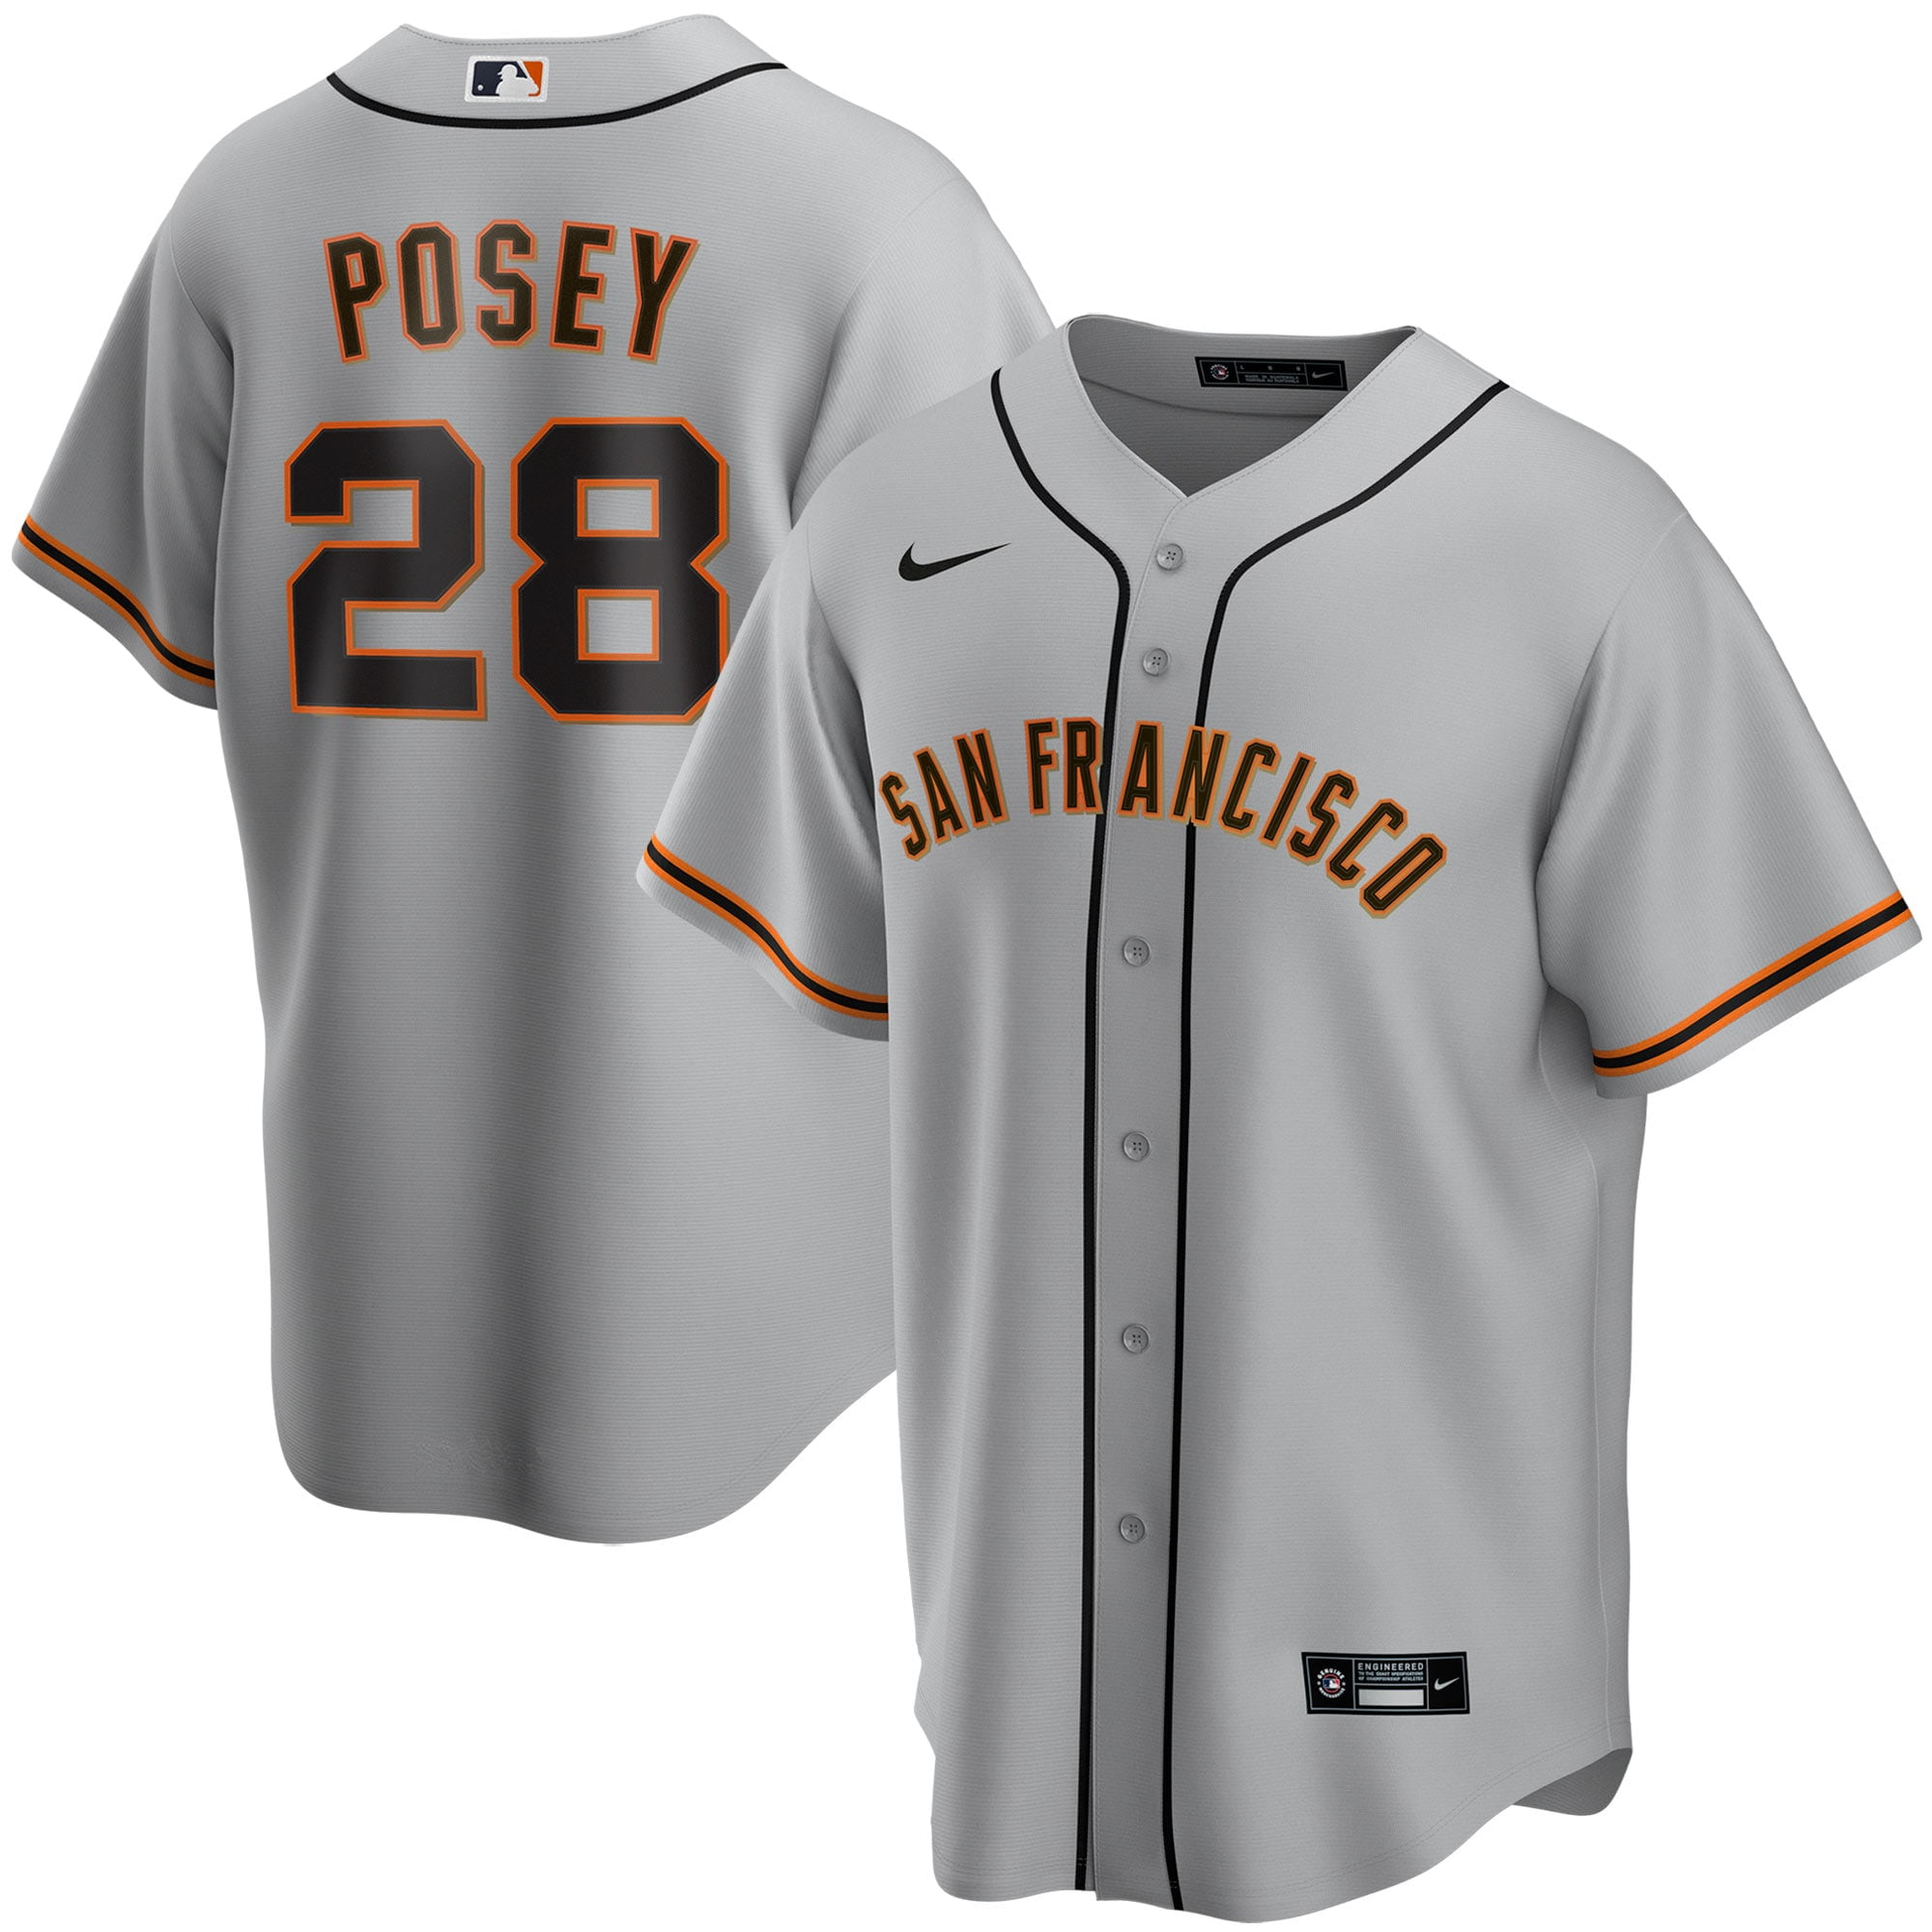 buster posey giants jersey